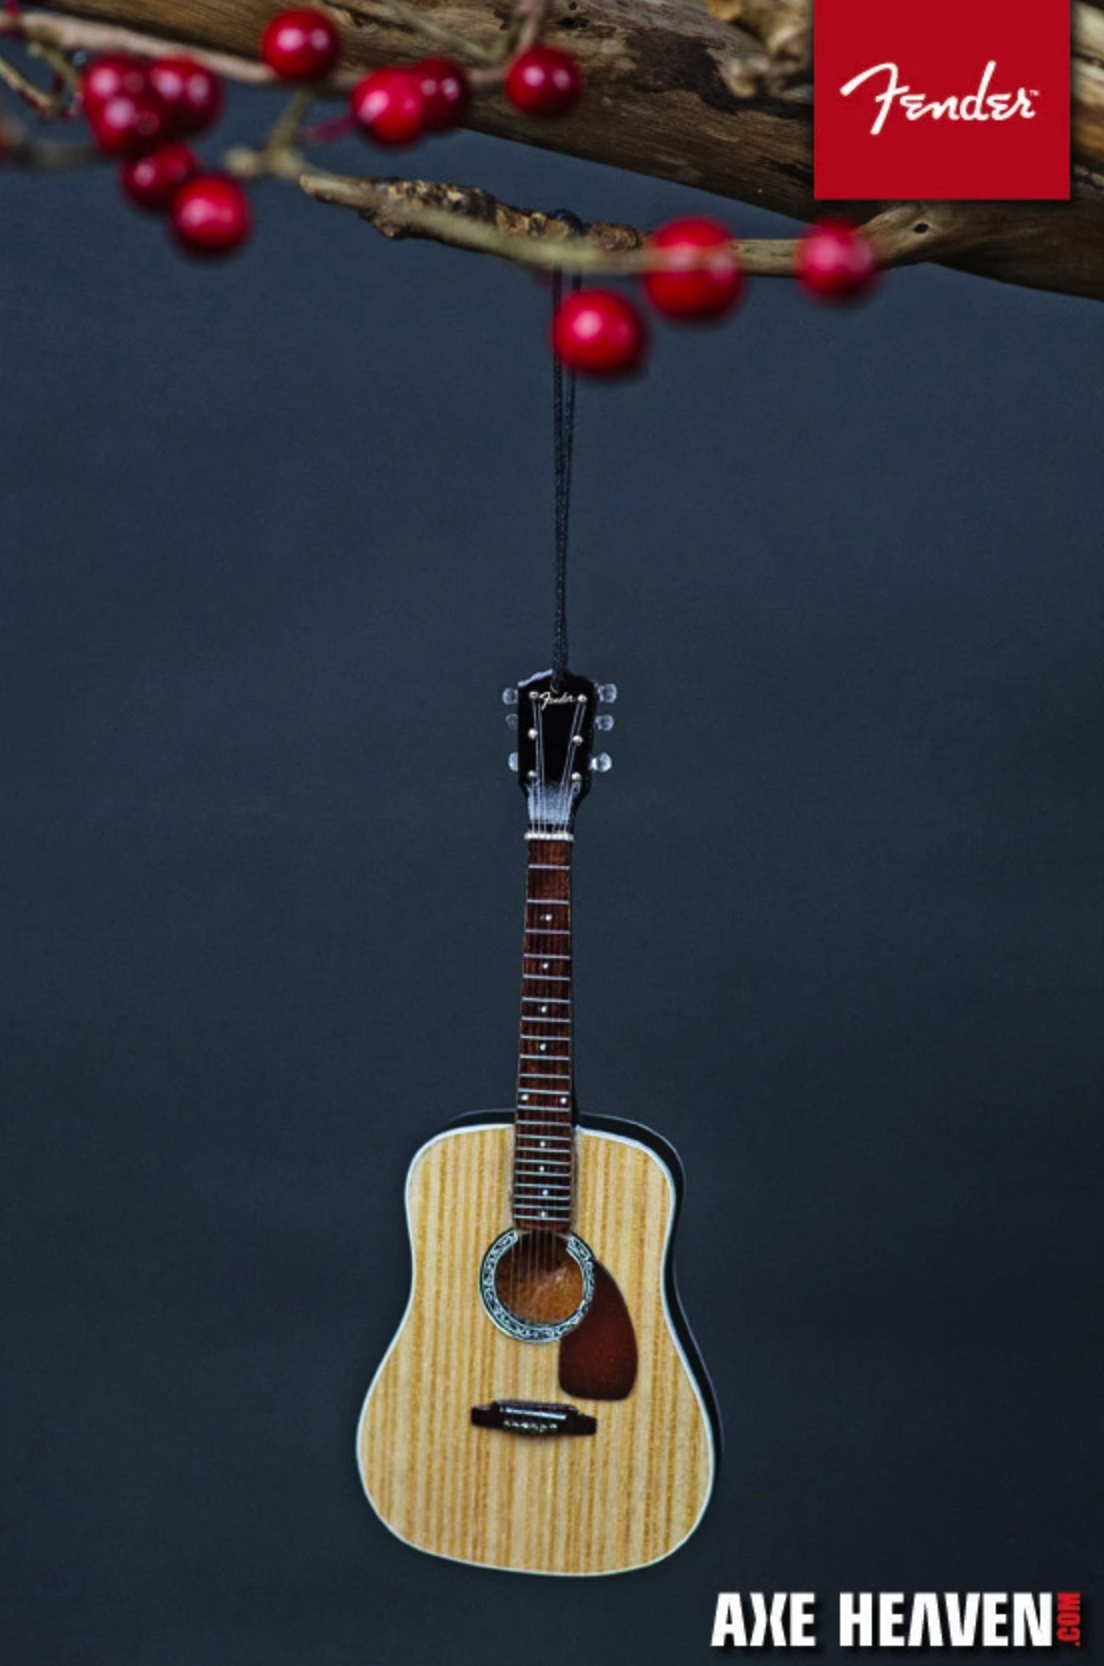 Axe Haven Fender PD-1 Acoustic Guitar - 6" Holiday Ornament